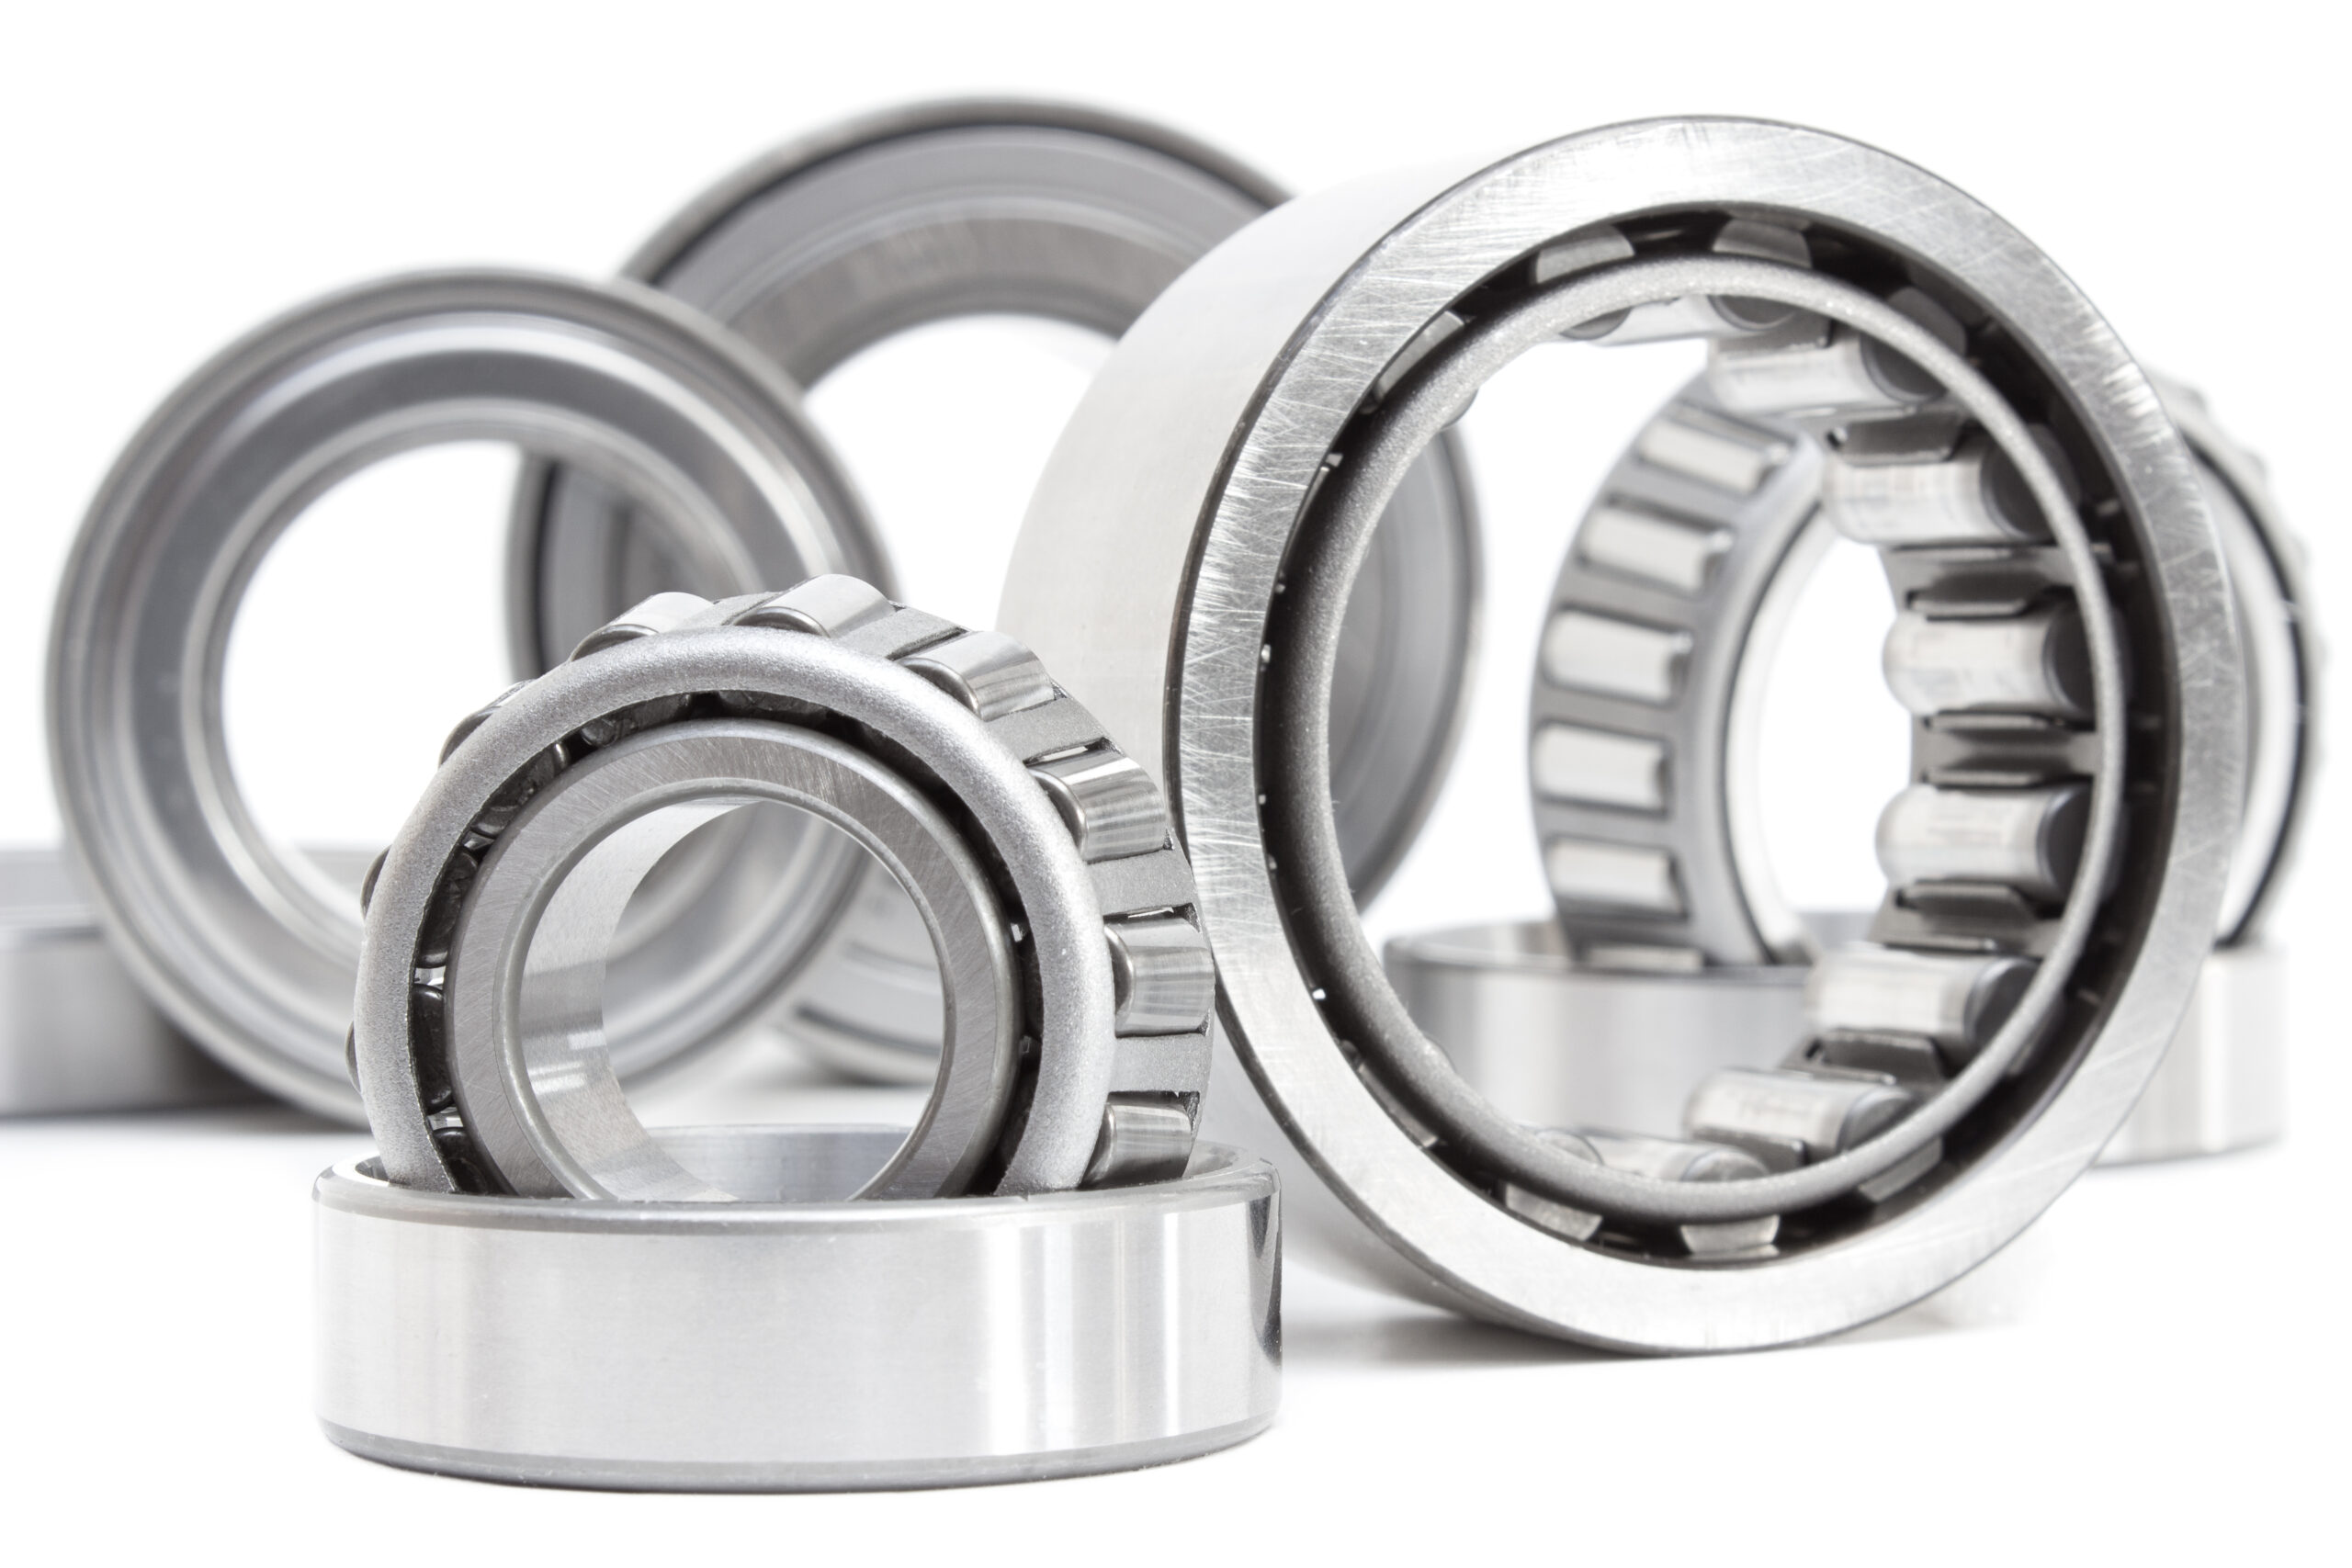 Roller-bearing,Open,And,Closed,On,A,White,Background